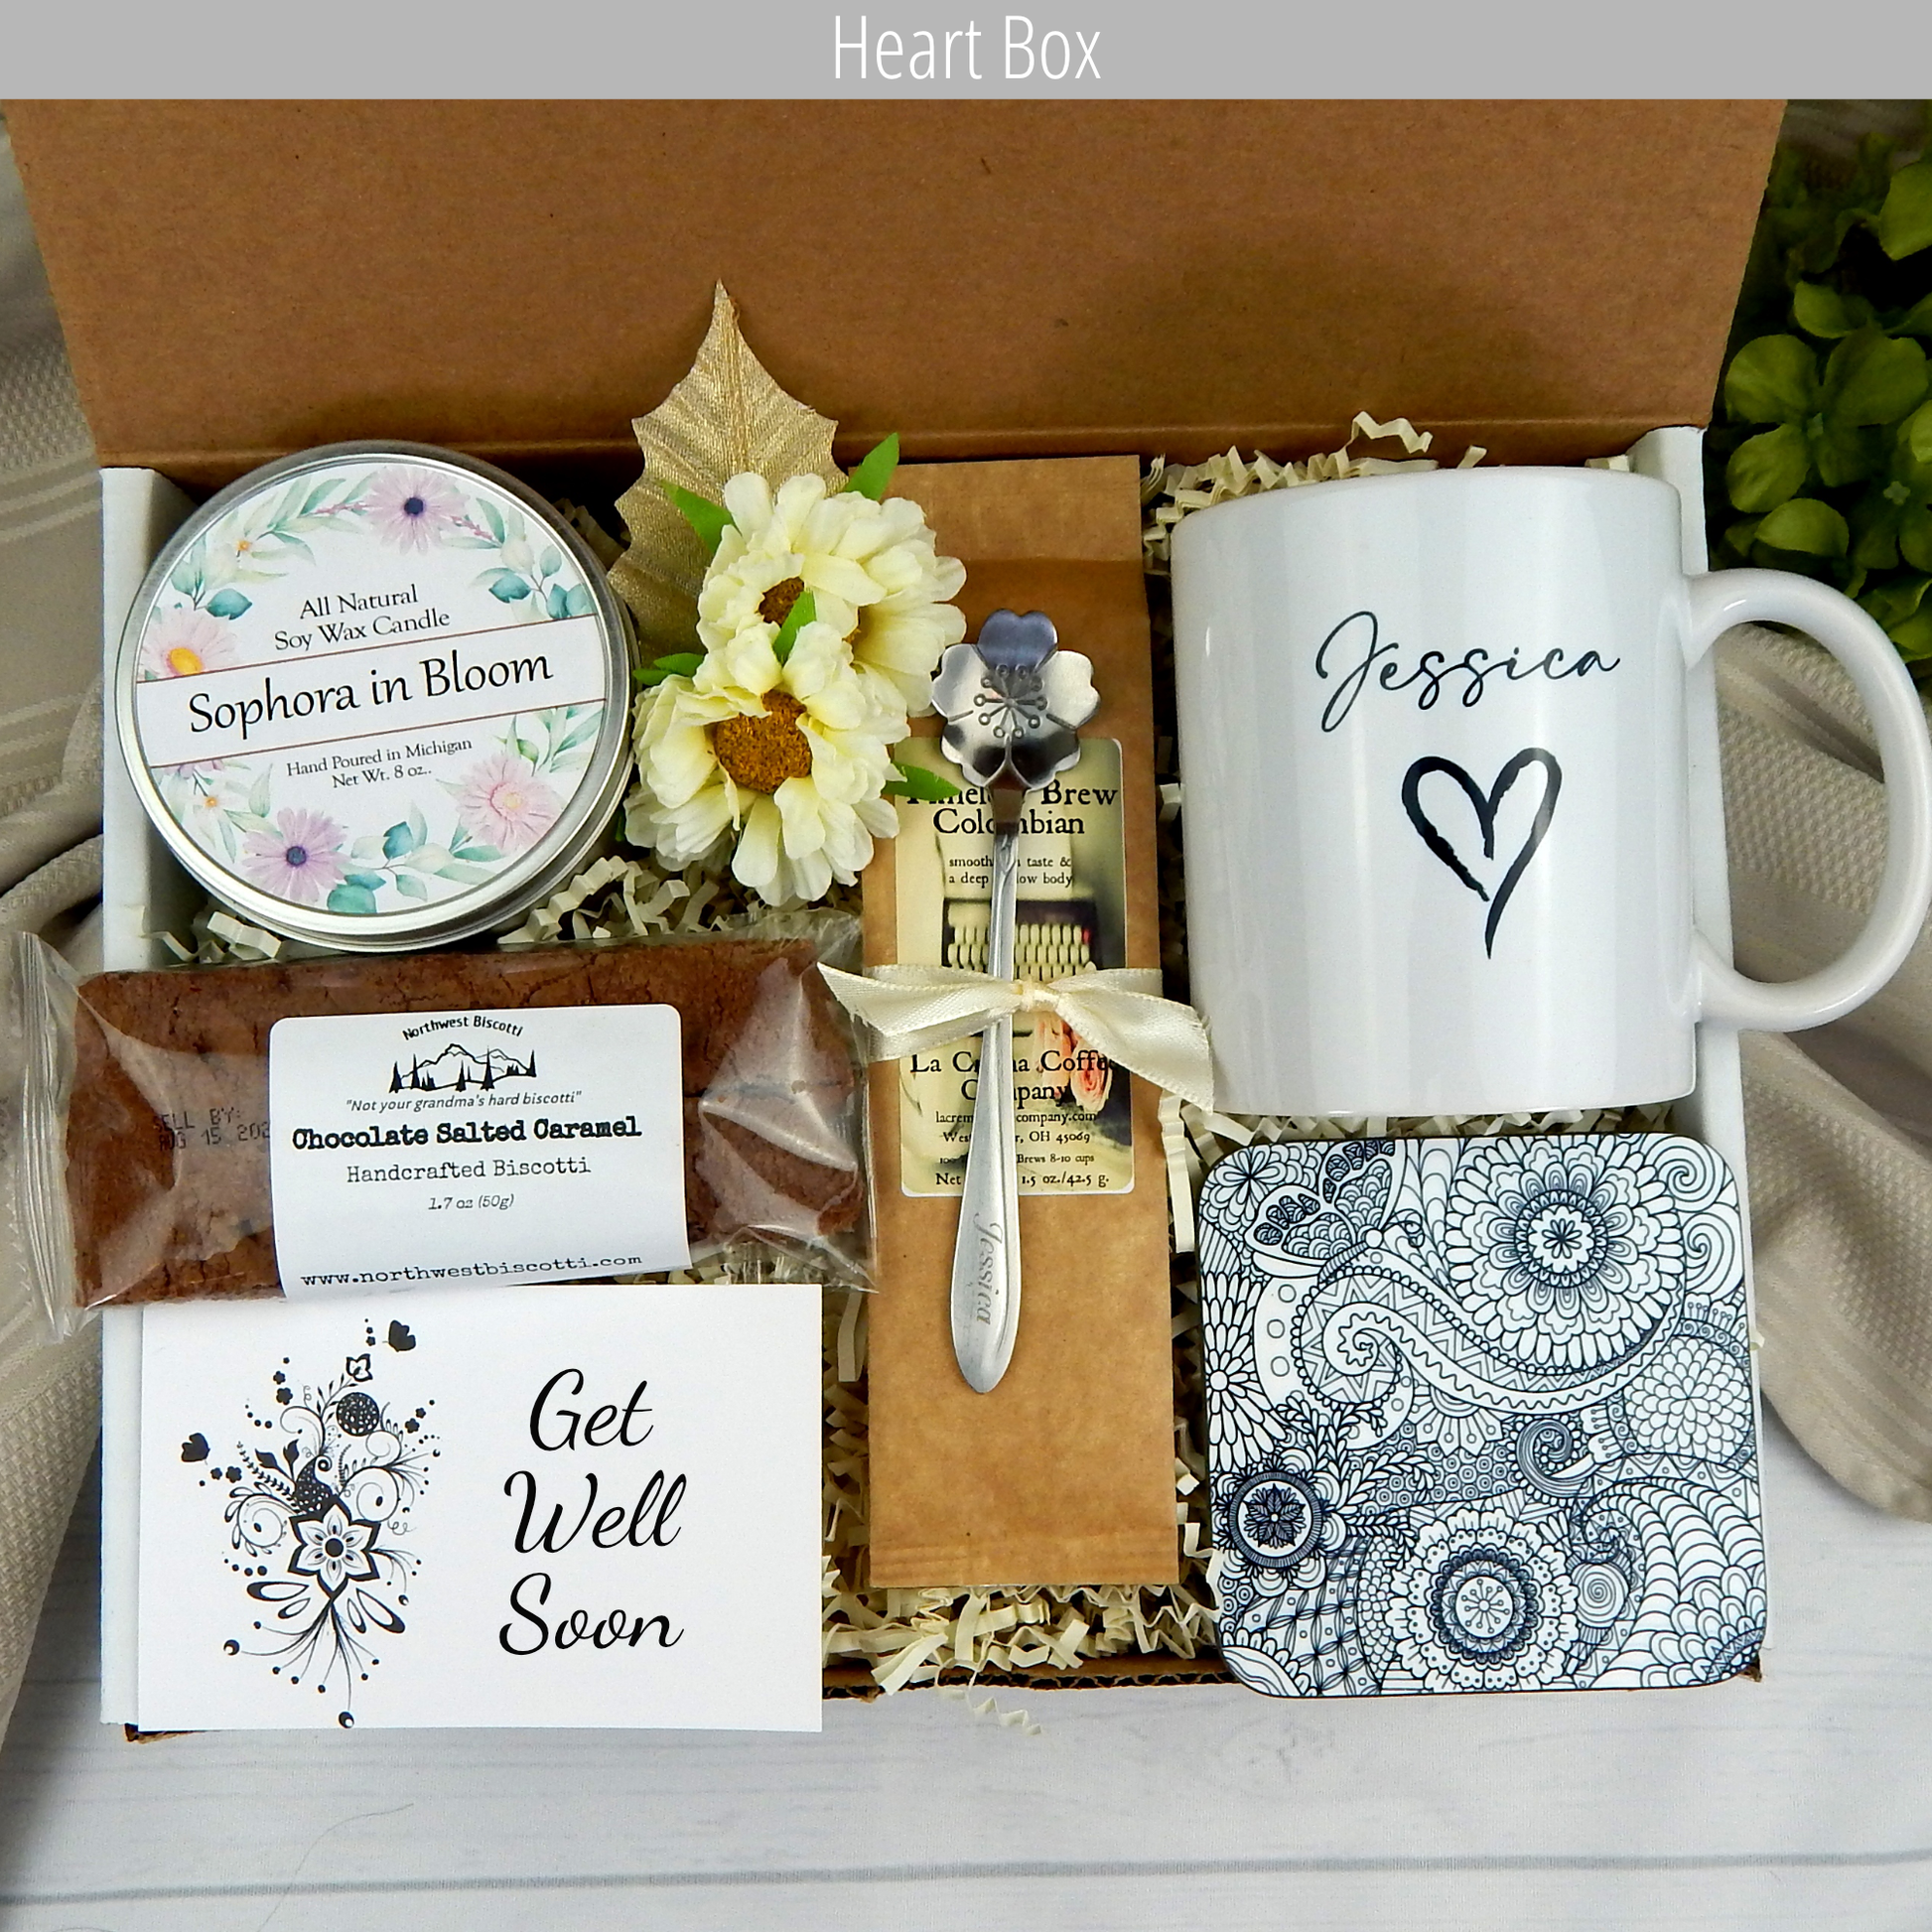 Sending healing vibes: Women's get well gift basket with personalized mug, coffee, and treats.